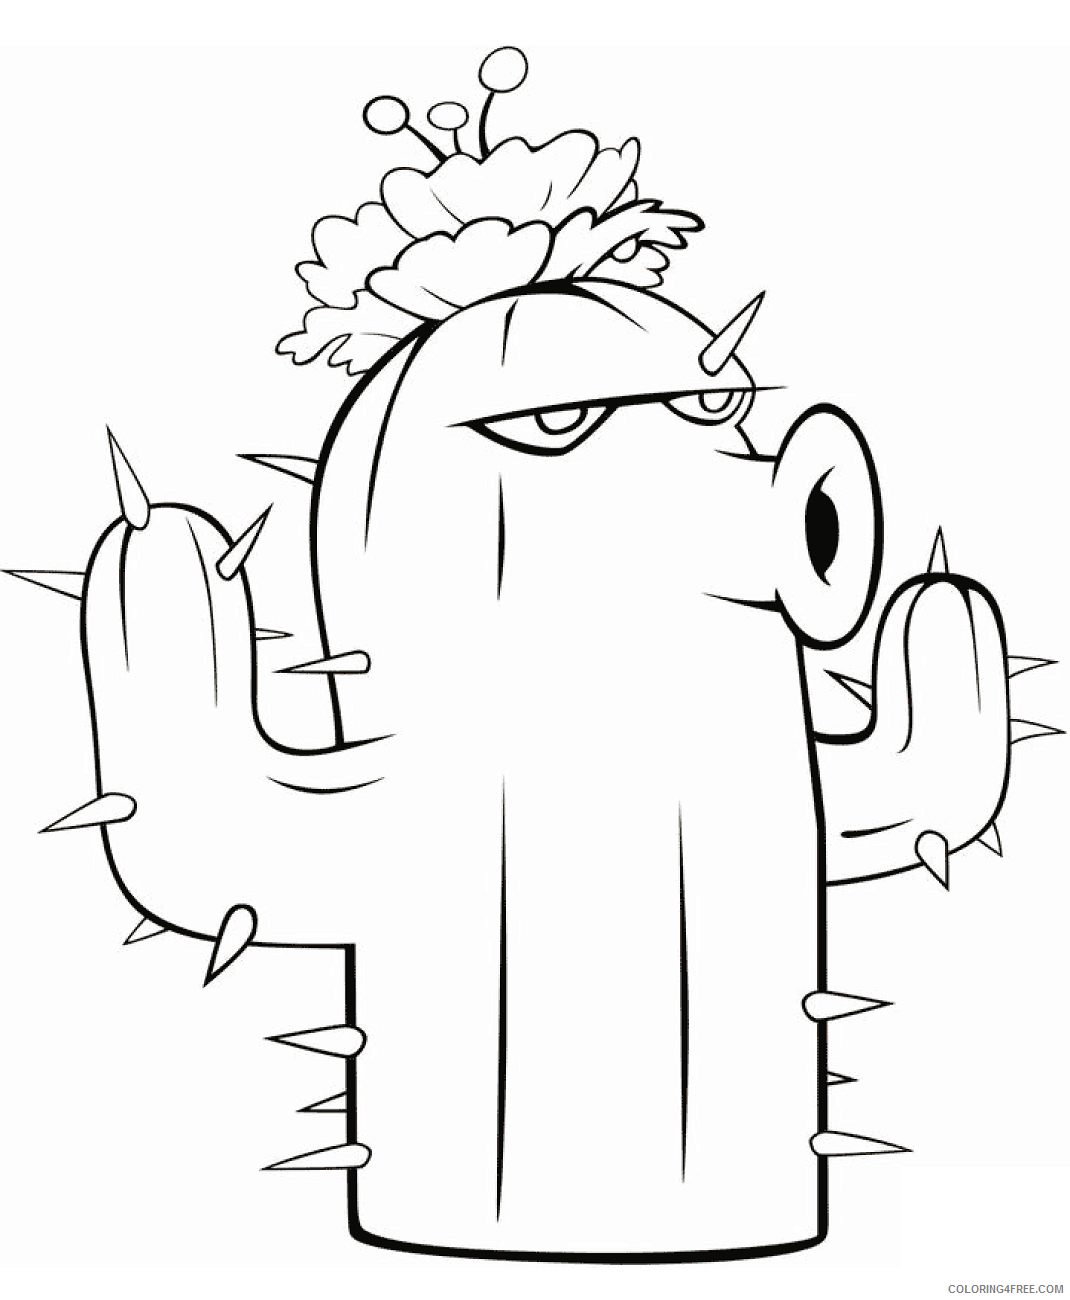 Plants vs Zombies Coloring Pages Games cactus Printable 2021 0812 Coloring4free